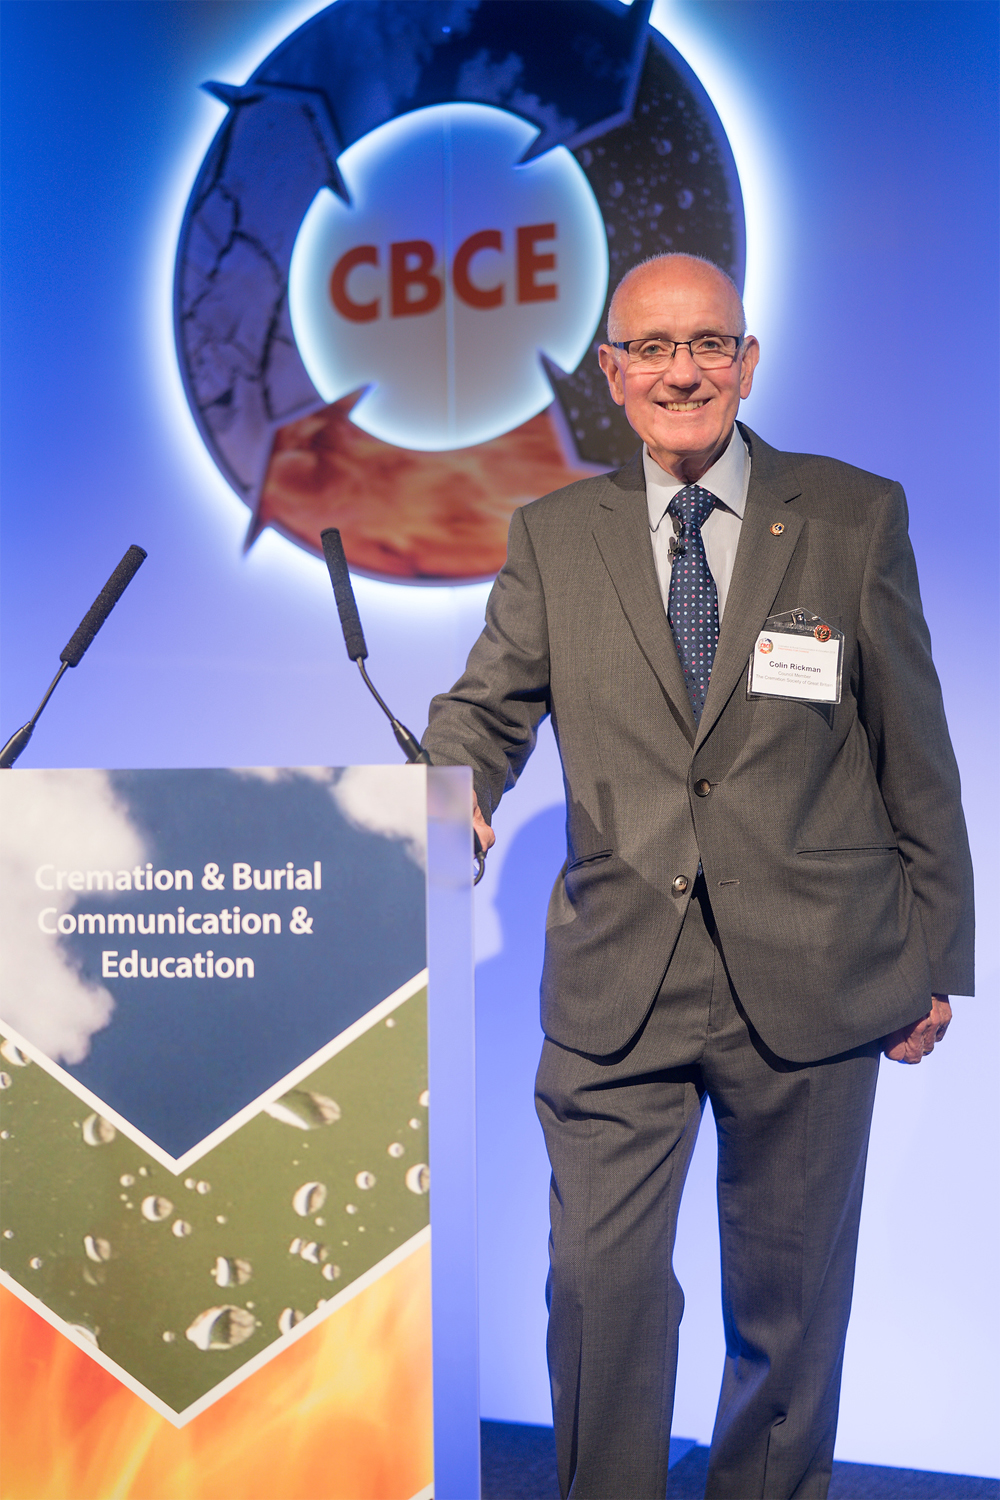 Photo of Colin Rickman - Council member of The Cremation Society of Great Britain